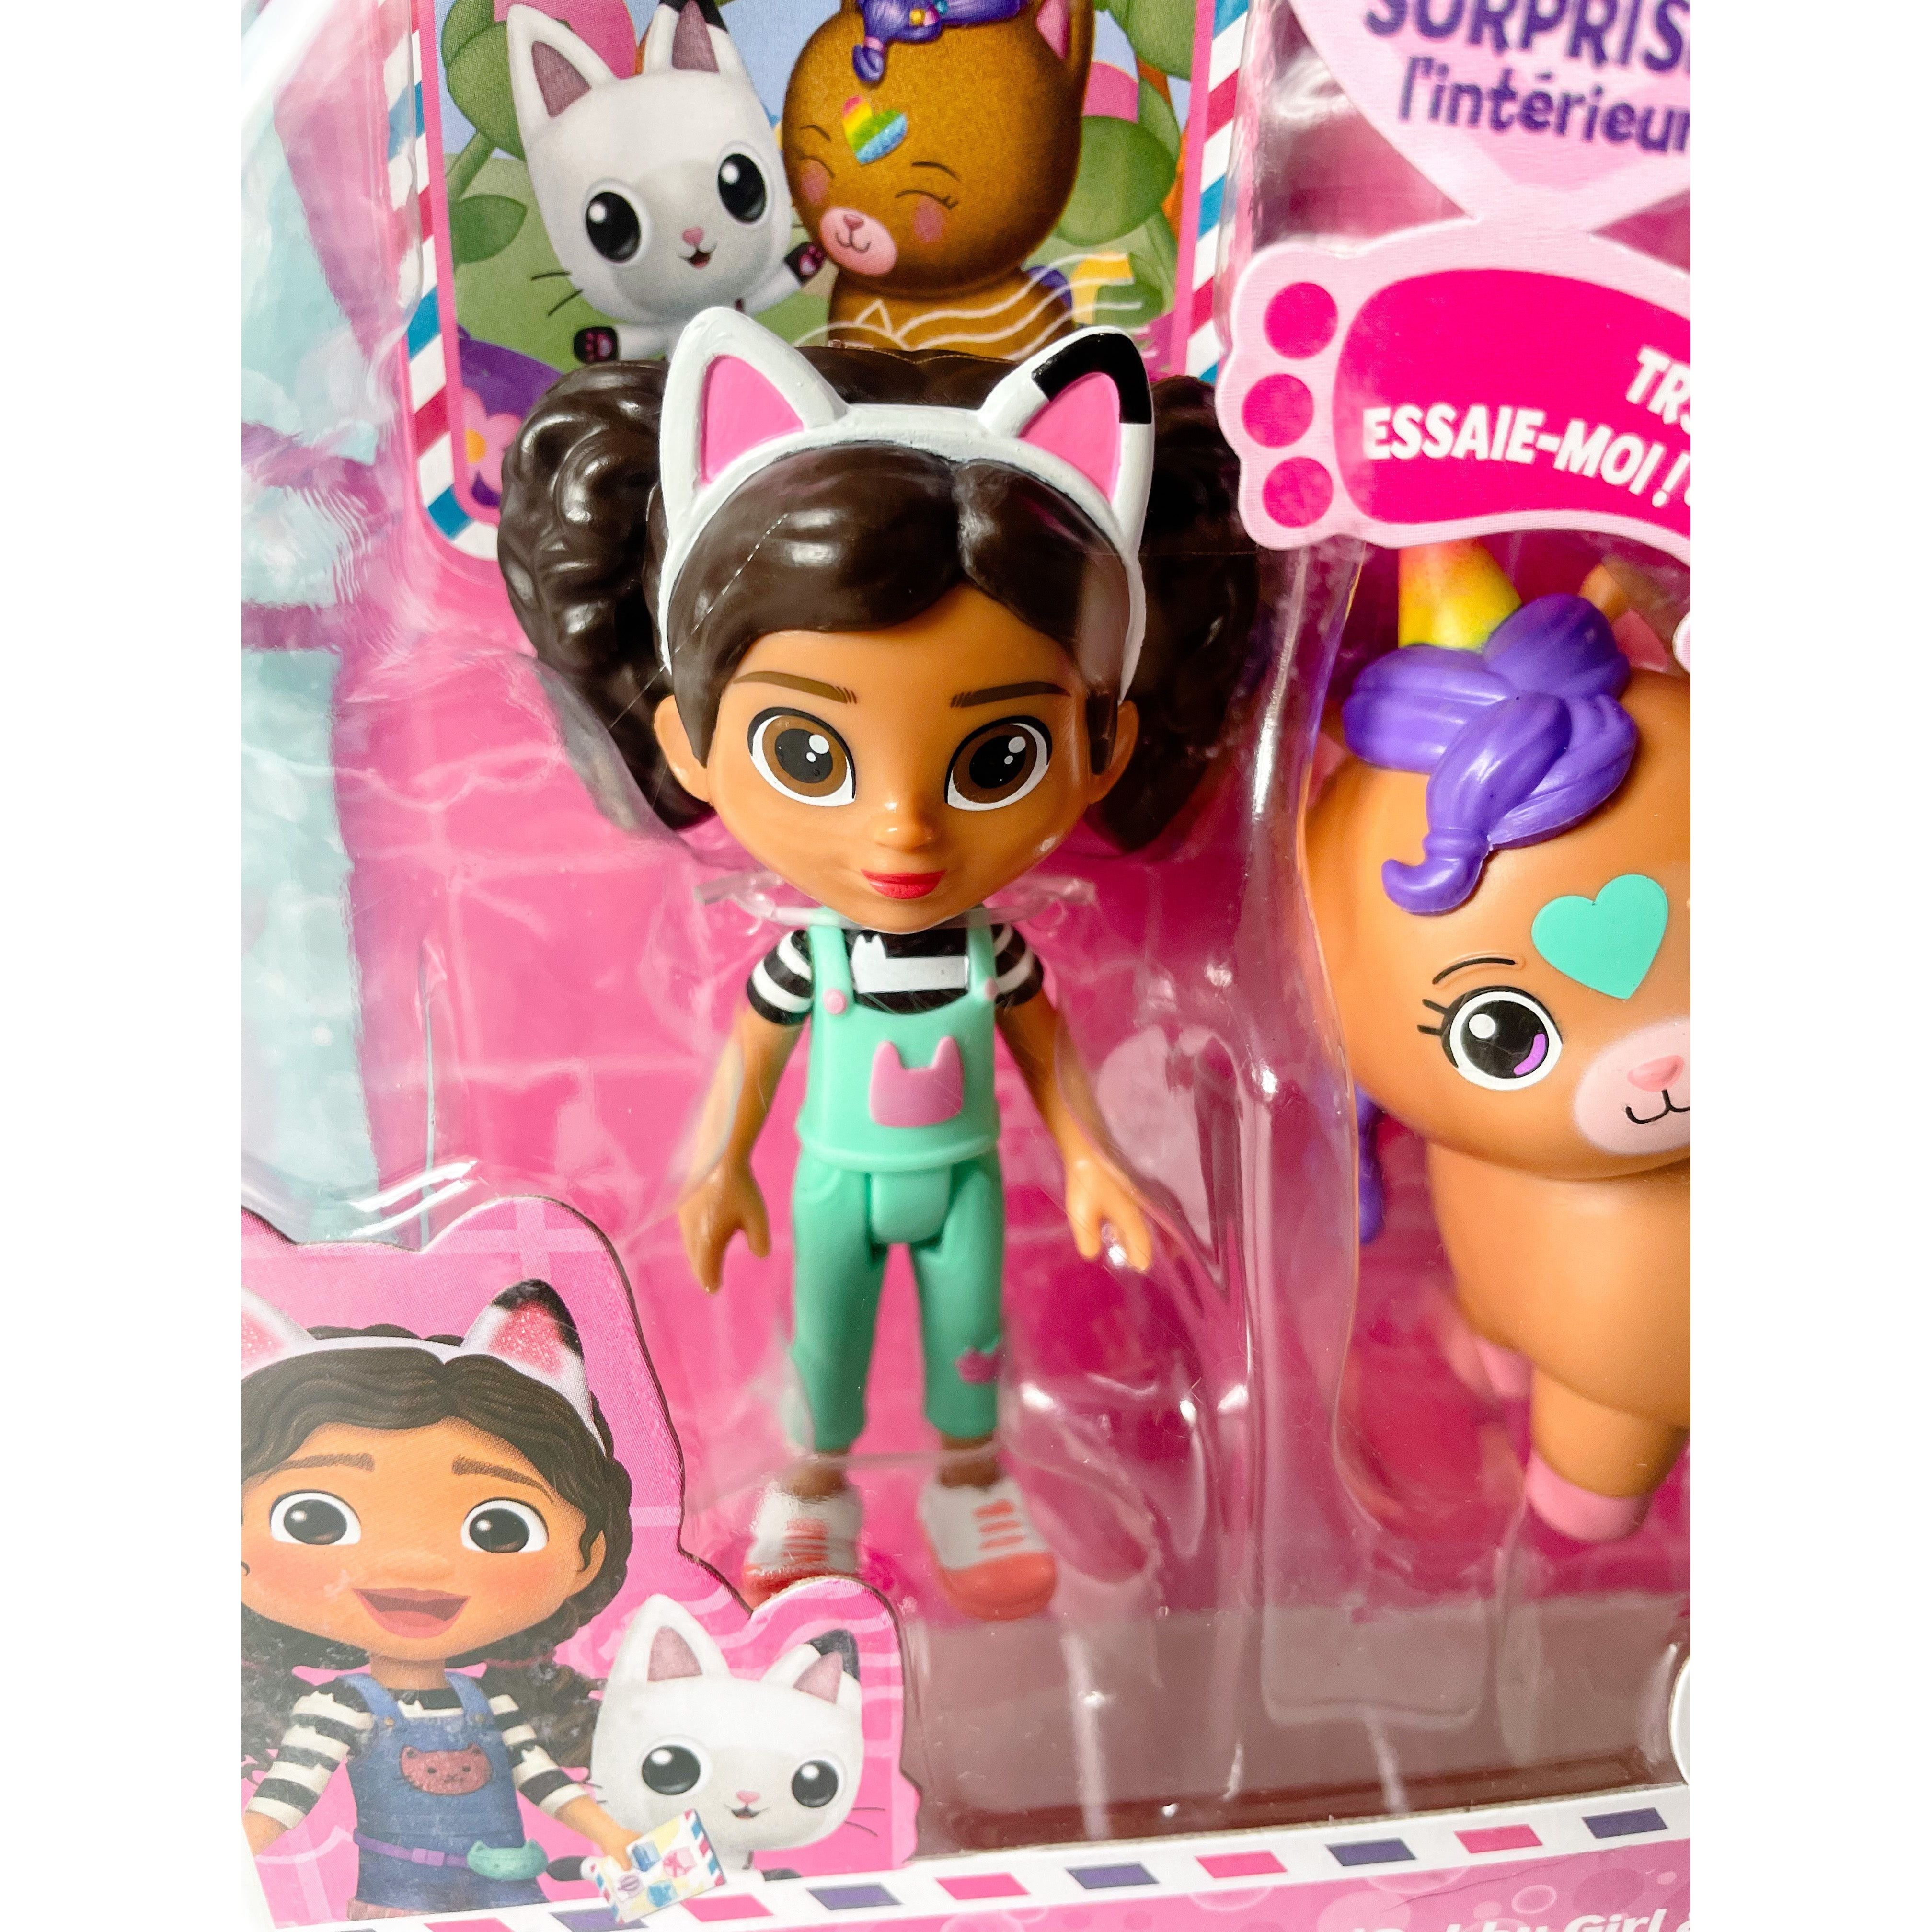 Gabby's Dollhouse, Gabby Girl and Kico the Kittycorn Toy Figures Pack, with  Accessories and Surprise Kids Toys for Ages 3 and up